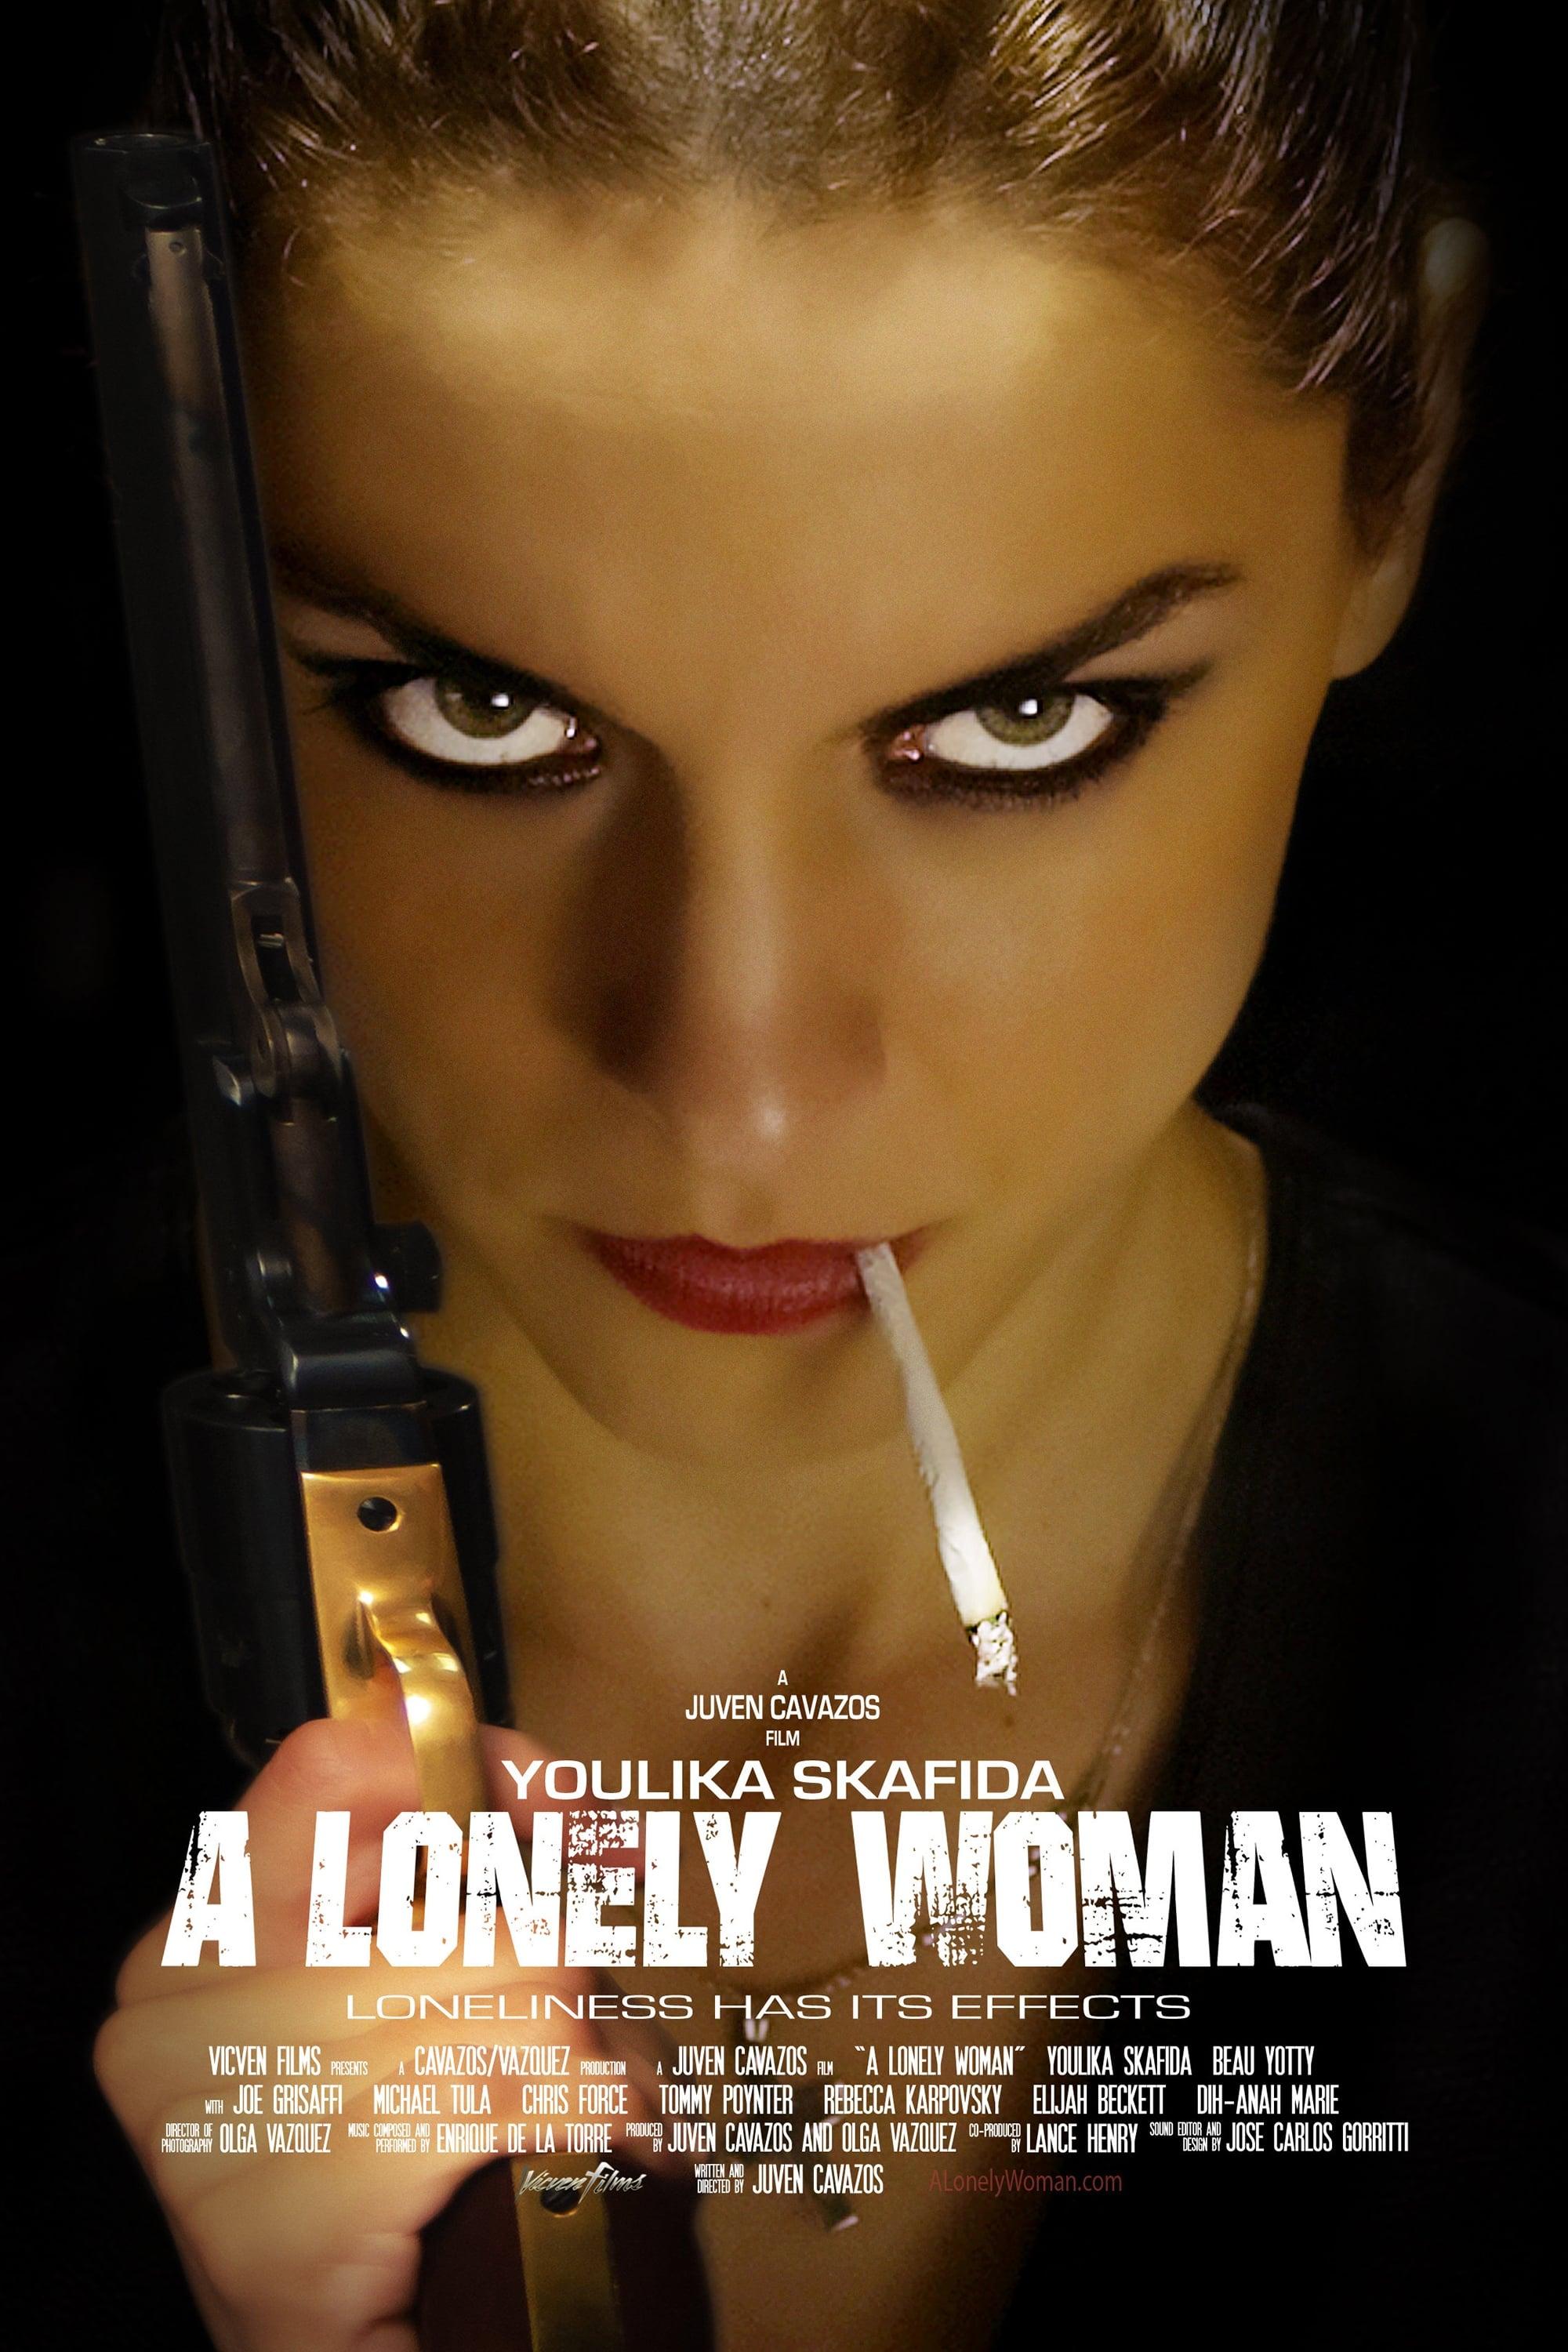 A Lonely Woman poster